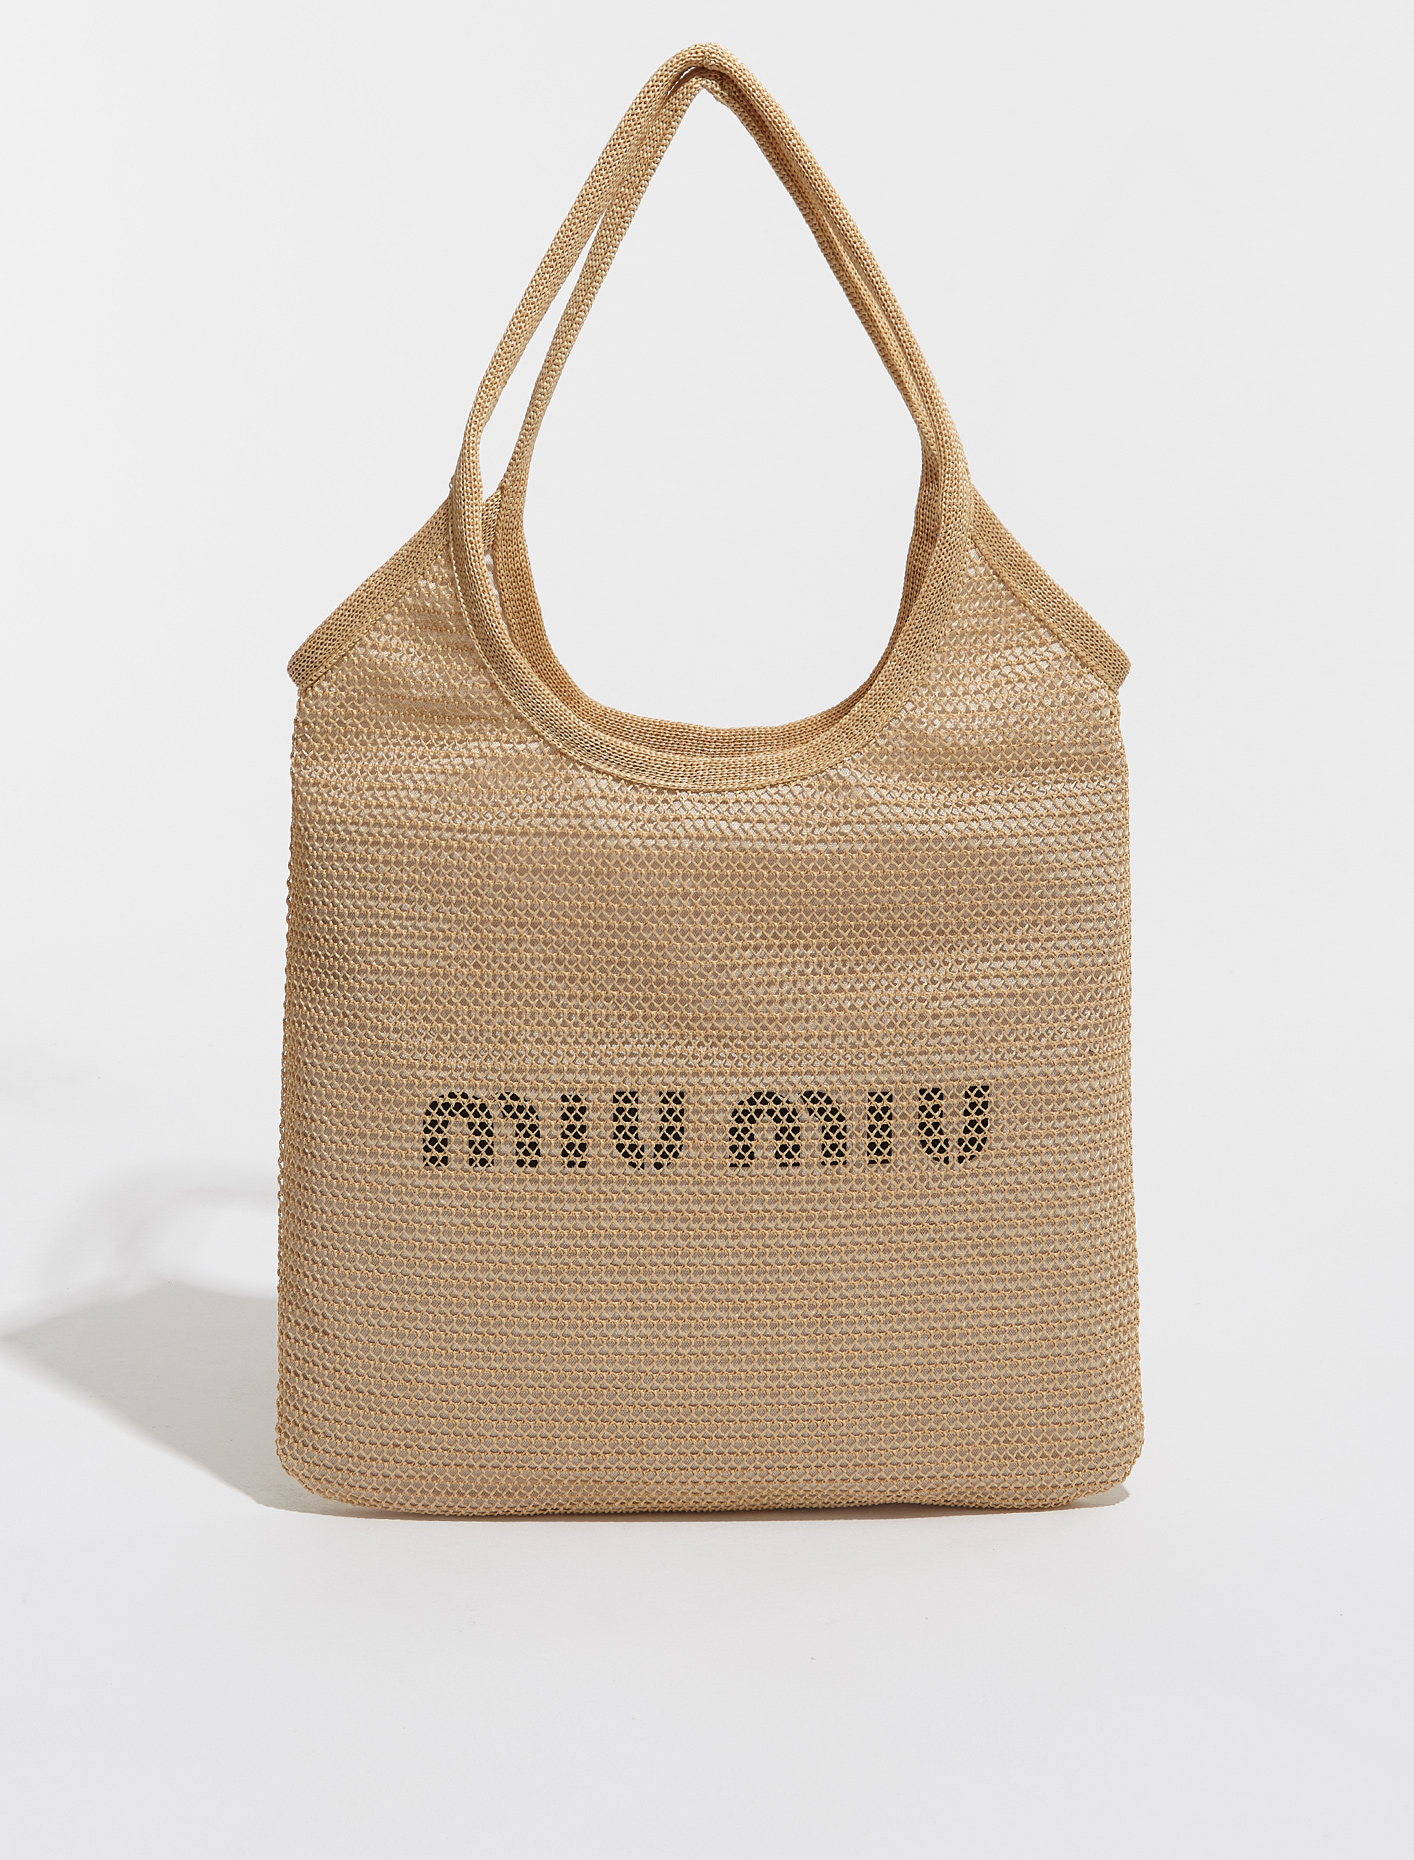 Raffia and Linen Tote Bag in Natural